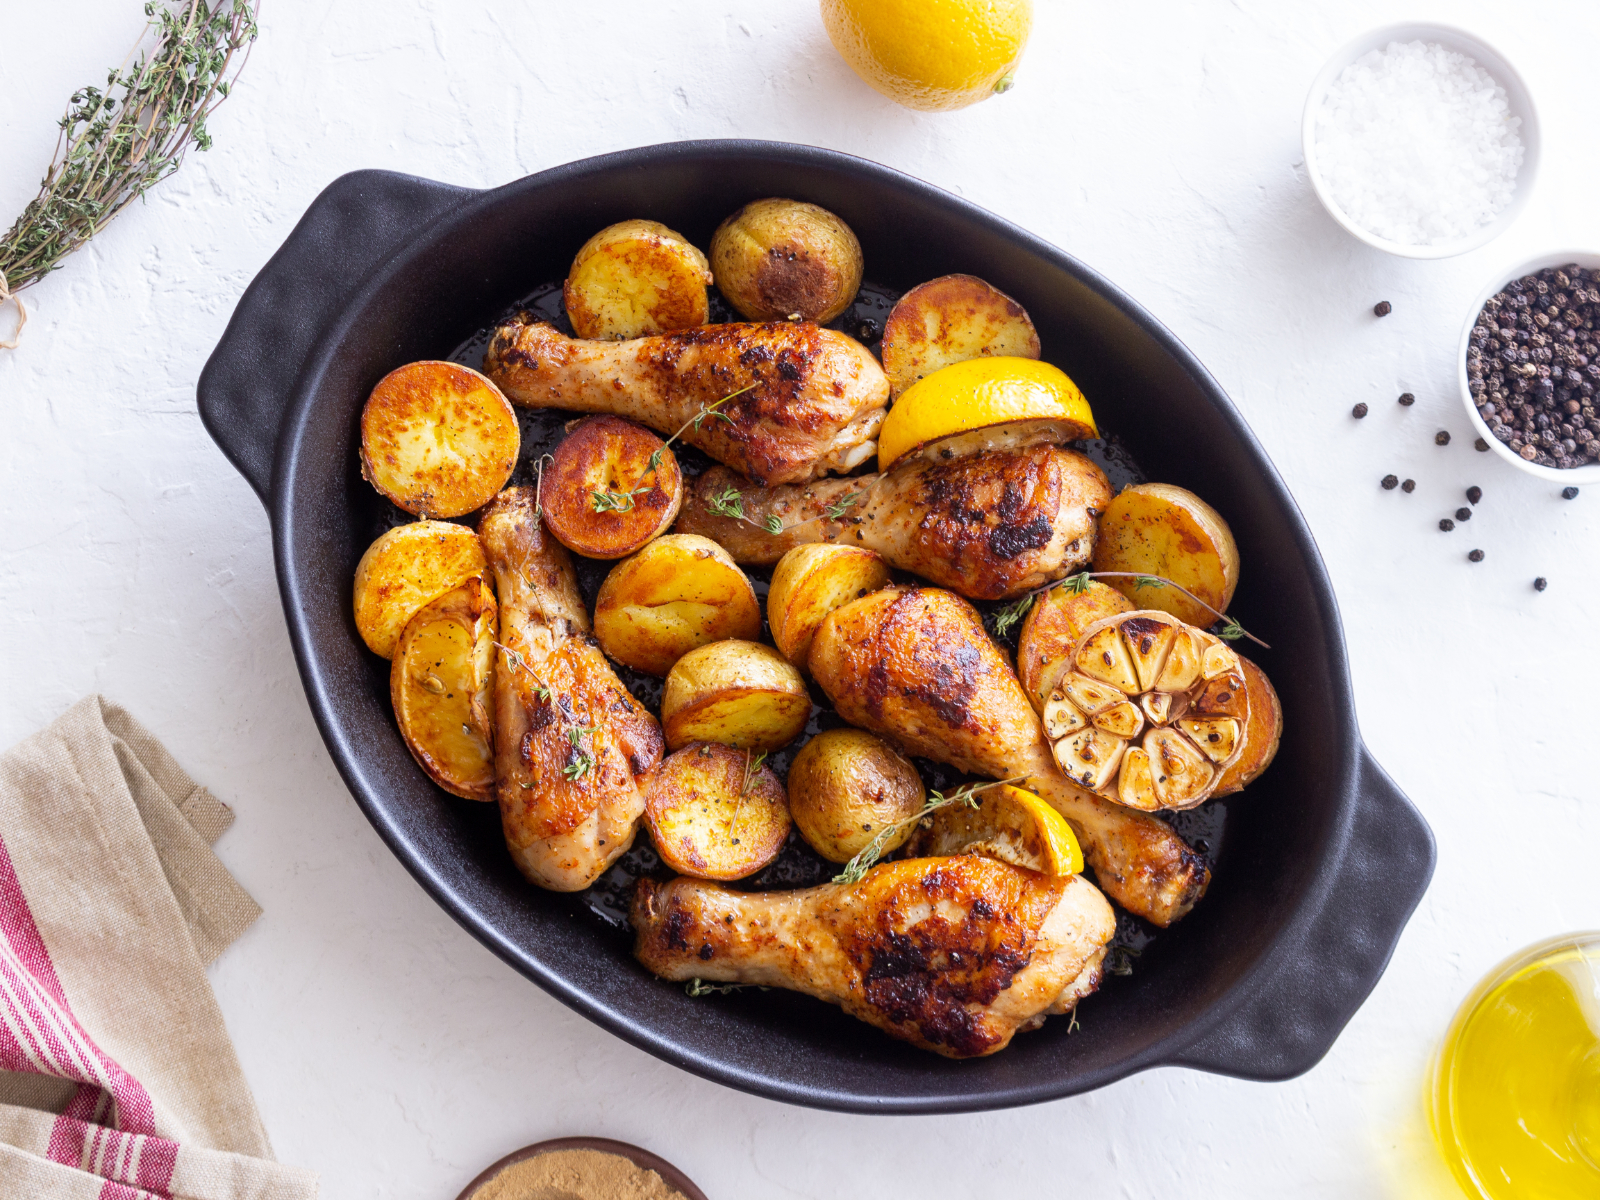 grilled chicken legs with roasted root vegetables